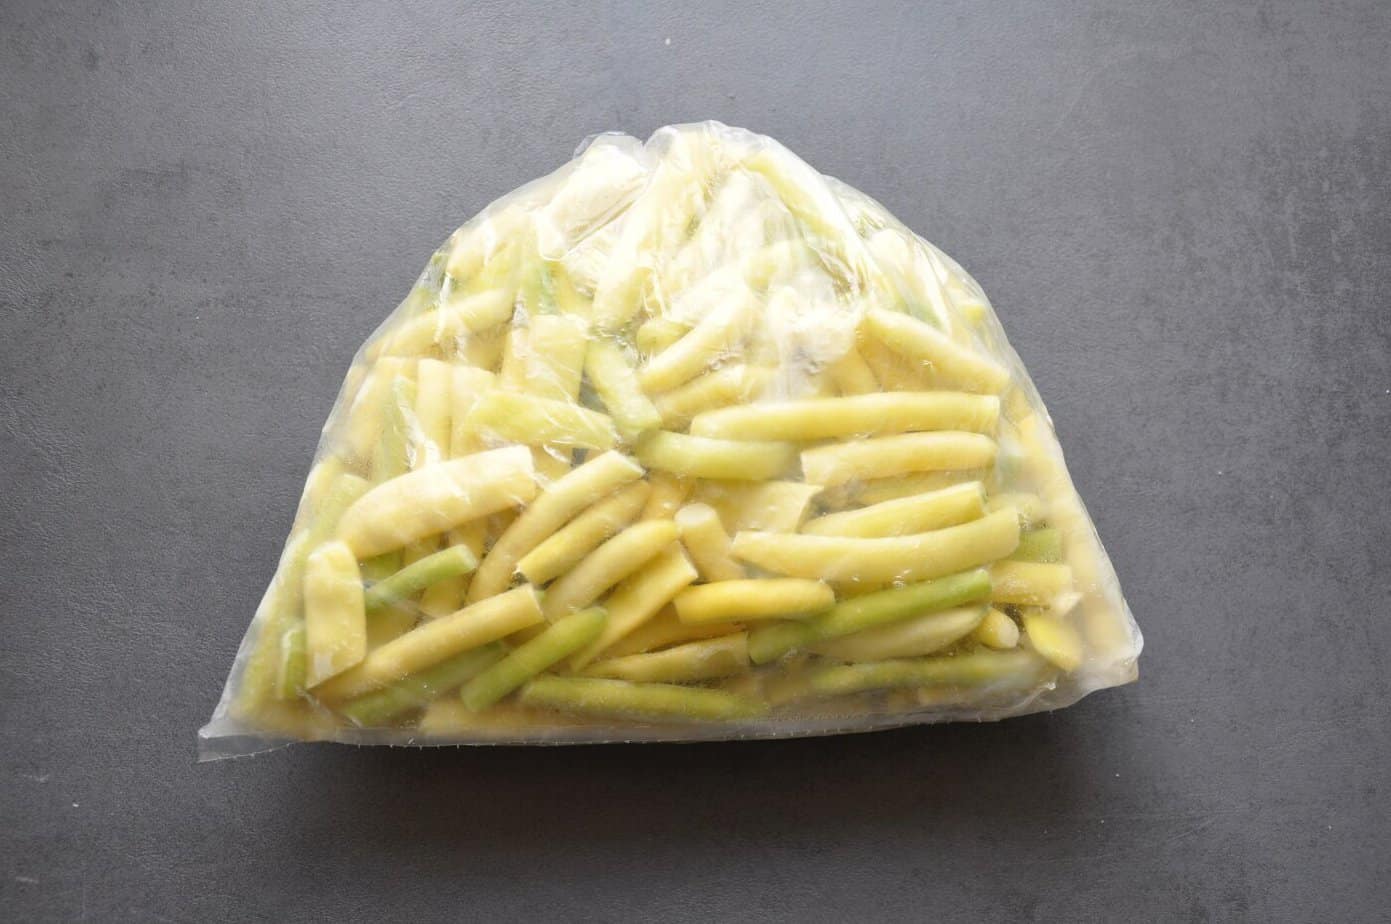 Frozen yellow wax beans in a plastic storage bag